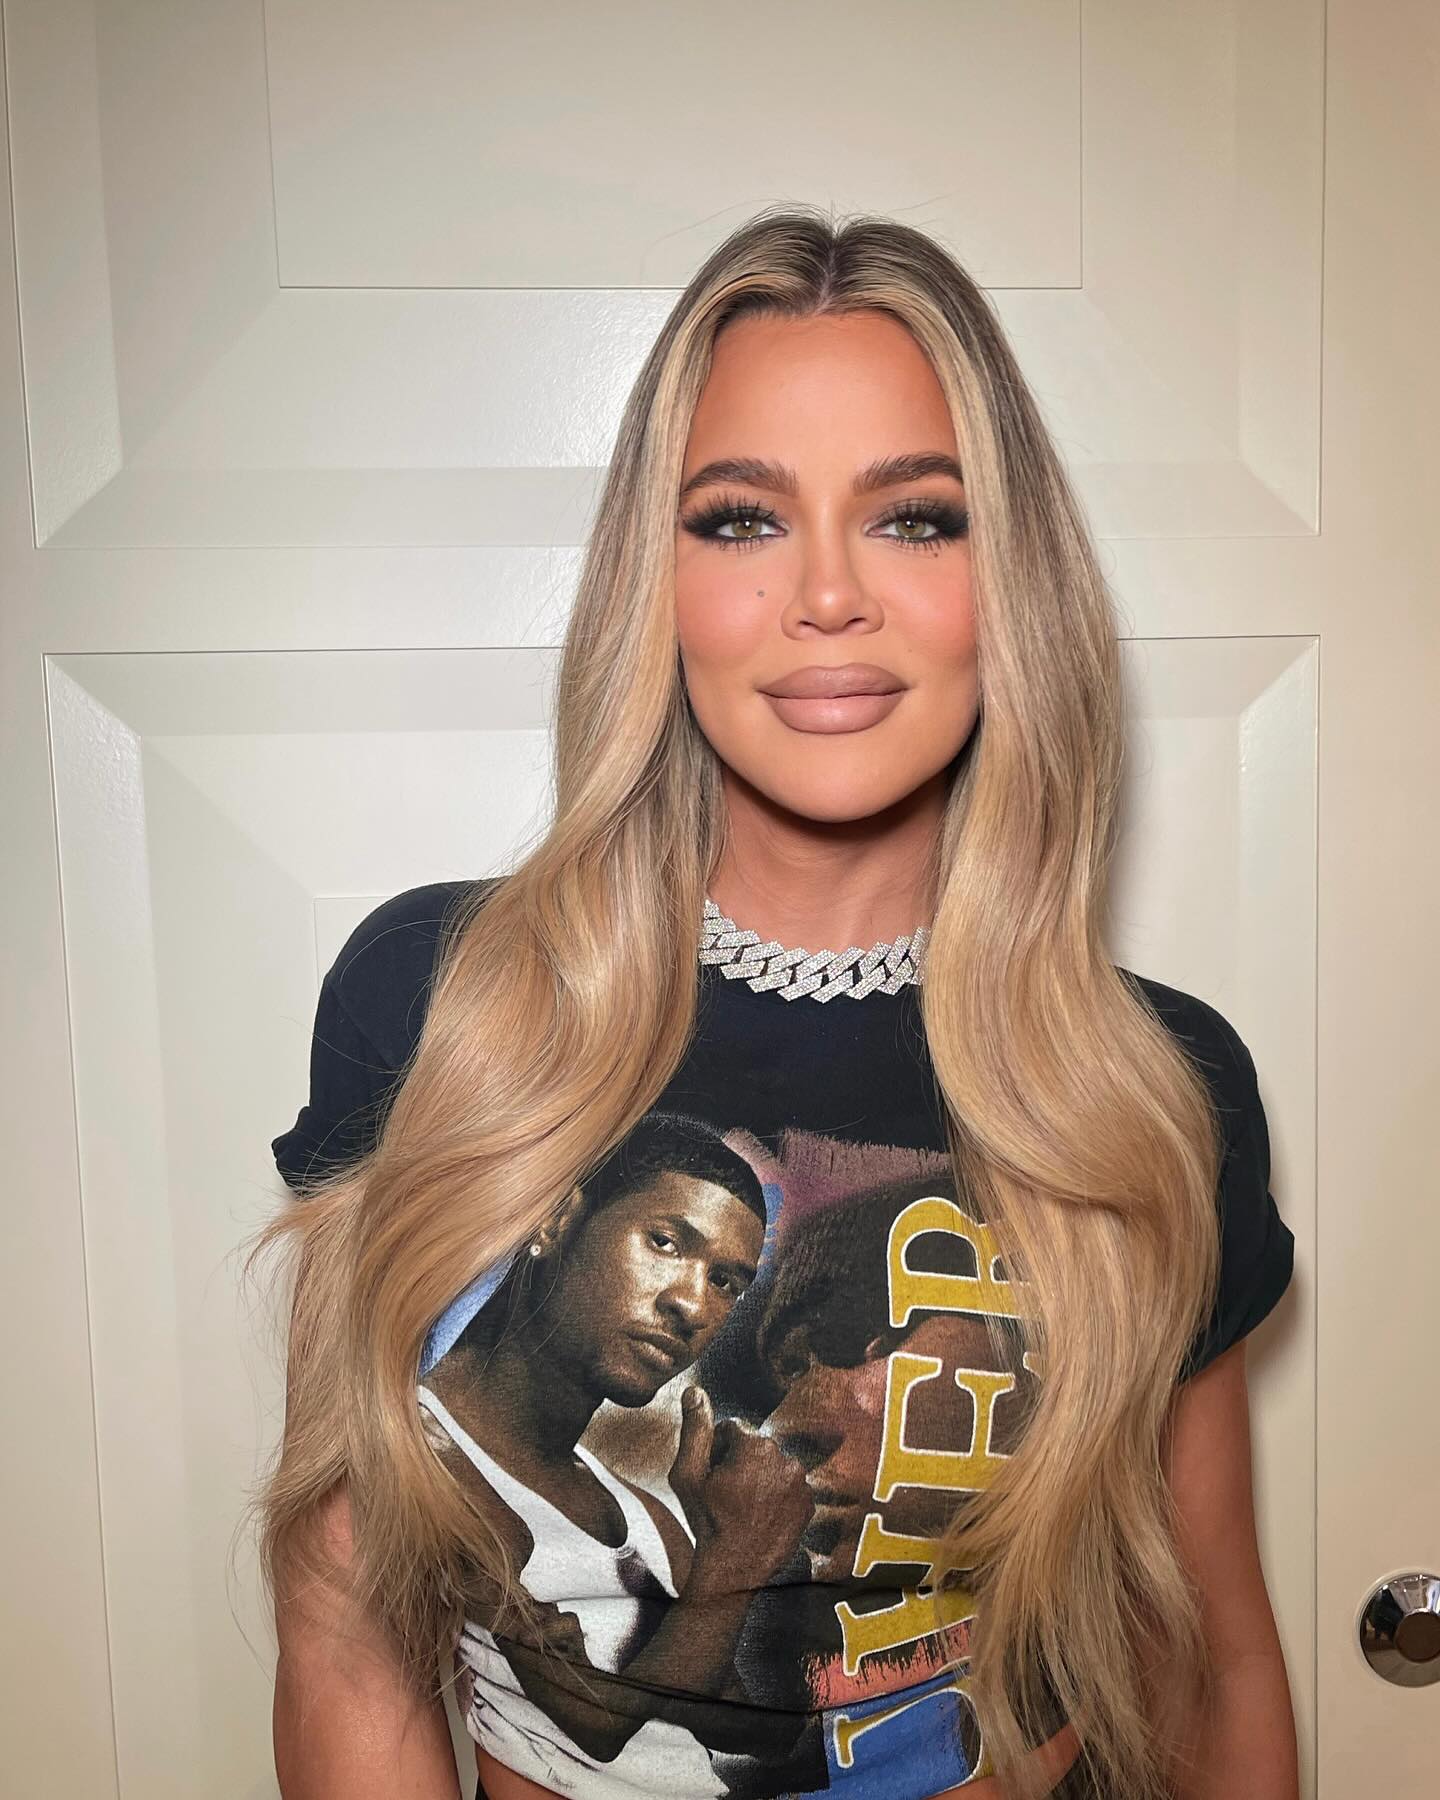 Khloe has her daughter True and son Tatum with her ex Tristan Thompson